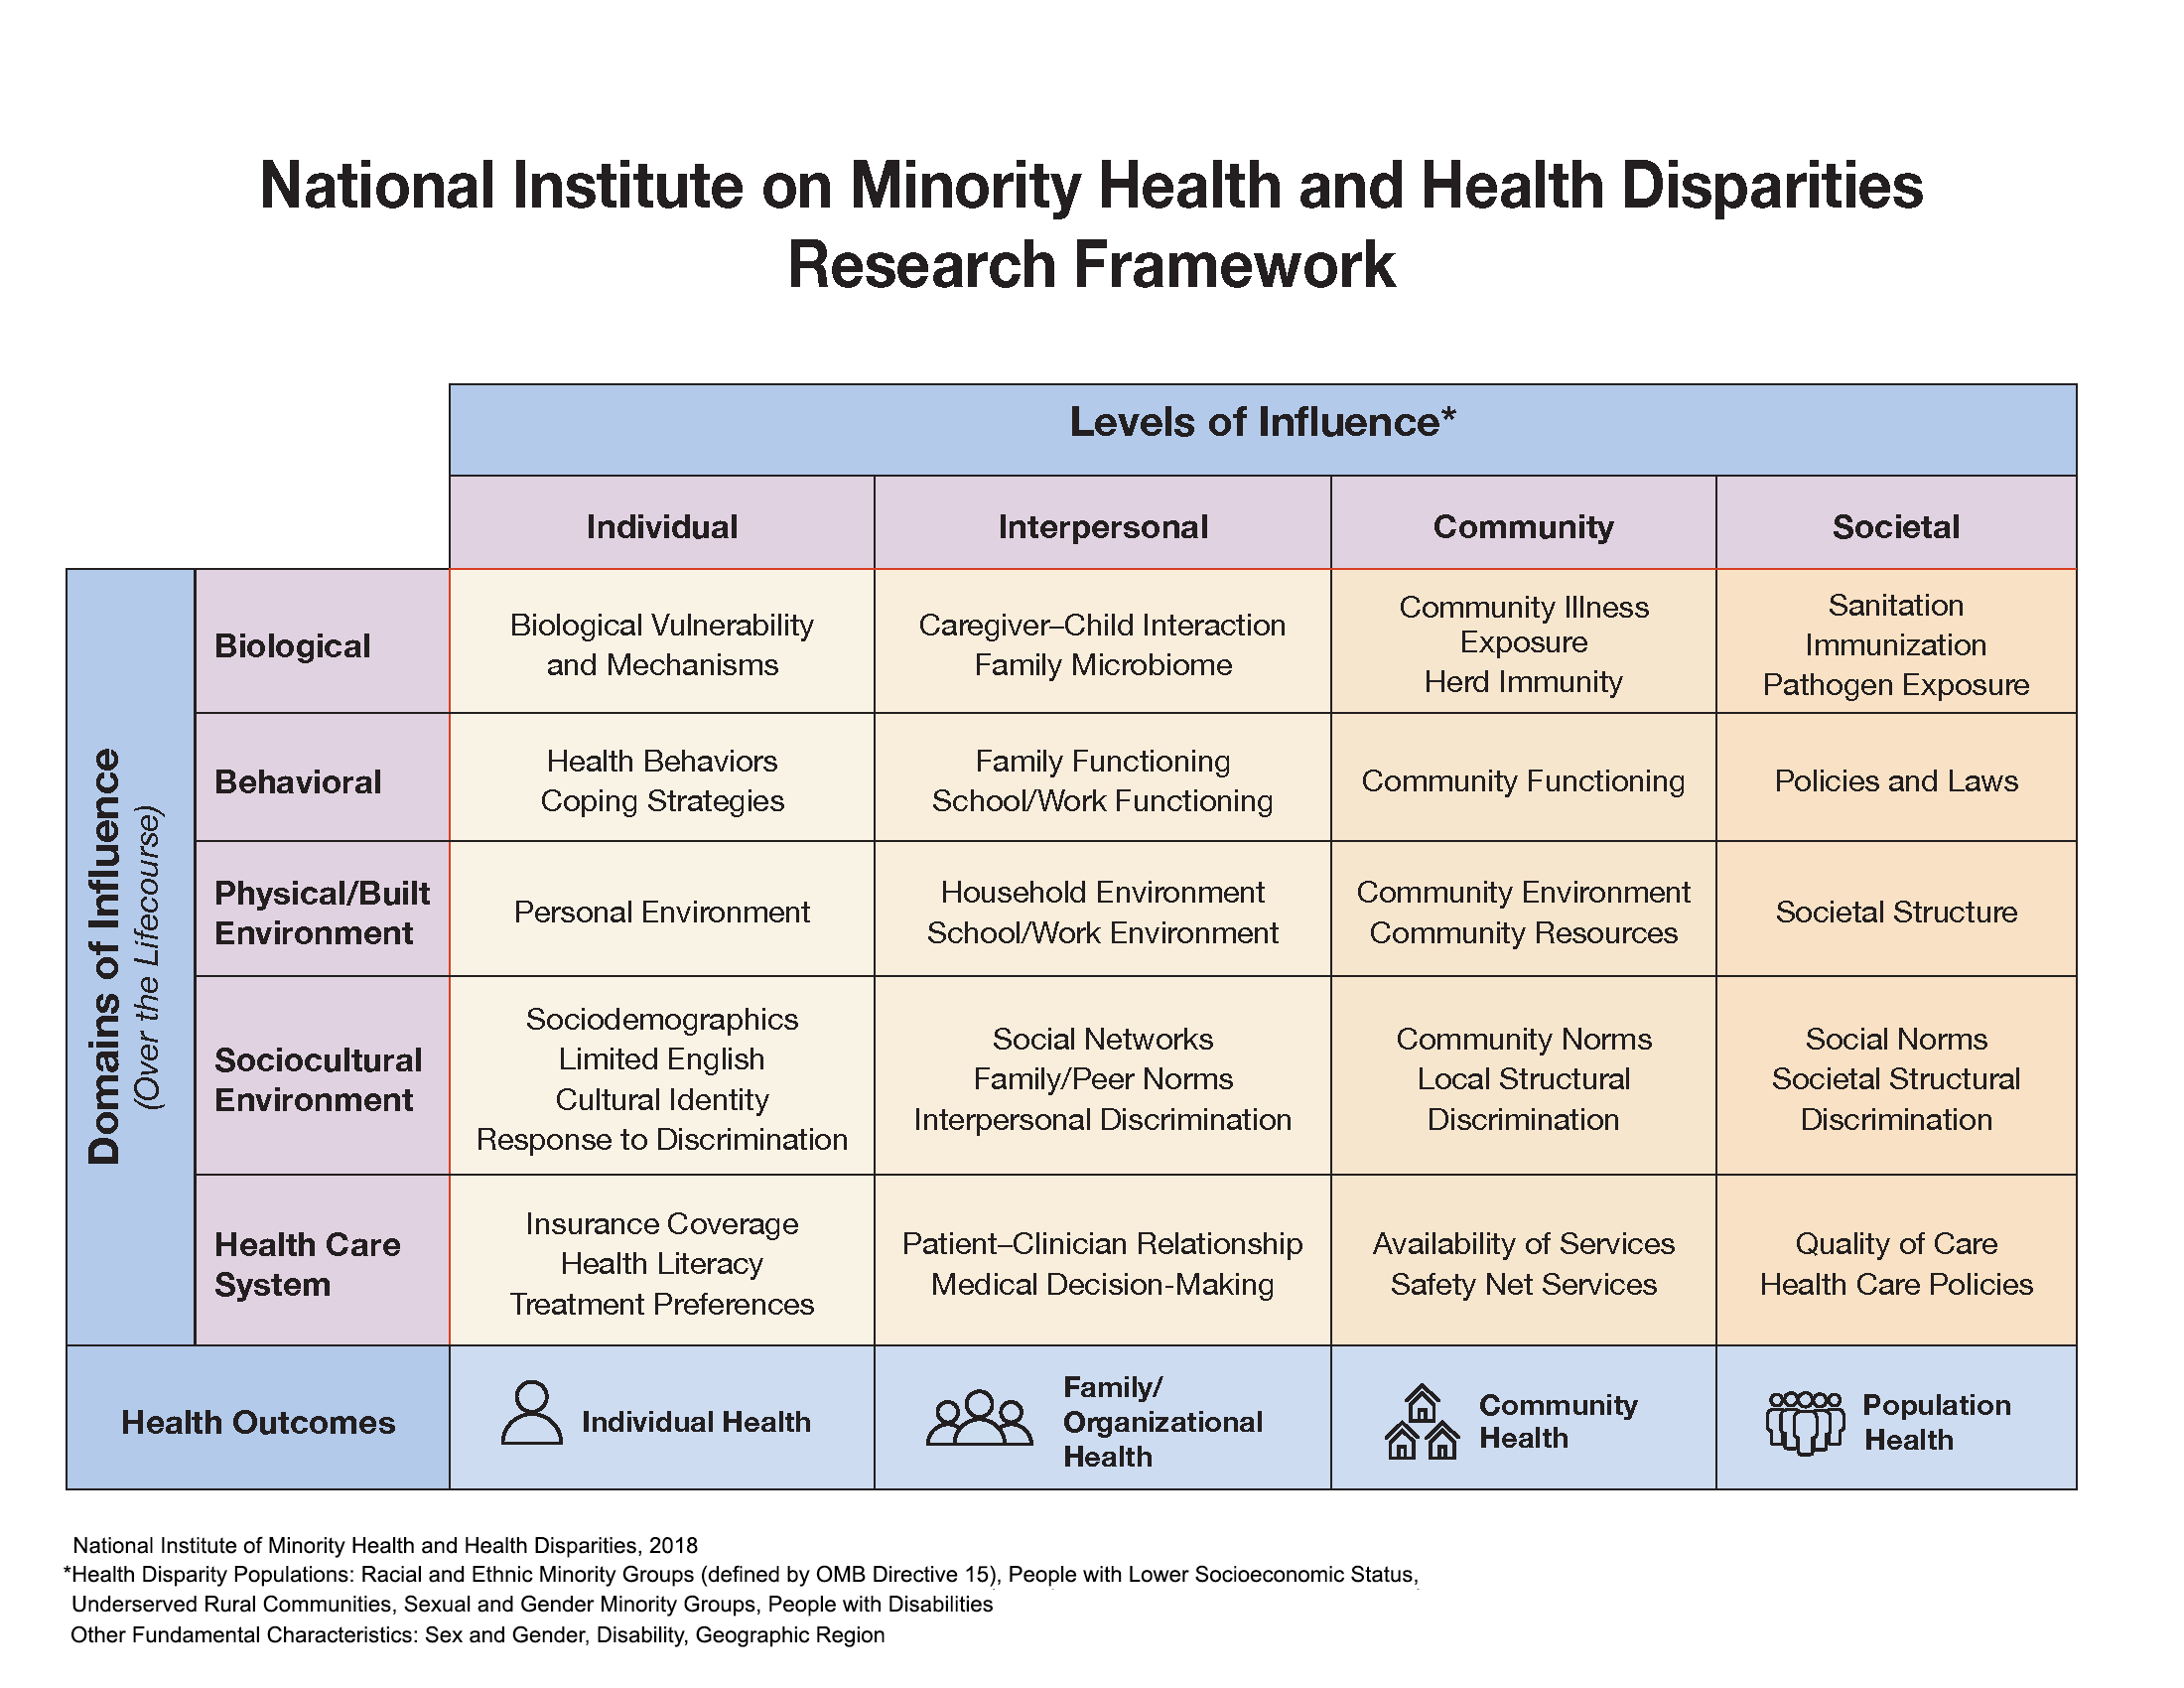 NIMHD Minority Health and Health Disparities Research Framework. To read all the details of the cells, click this image to download the accessible PDF